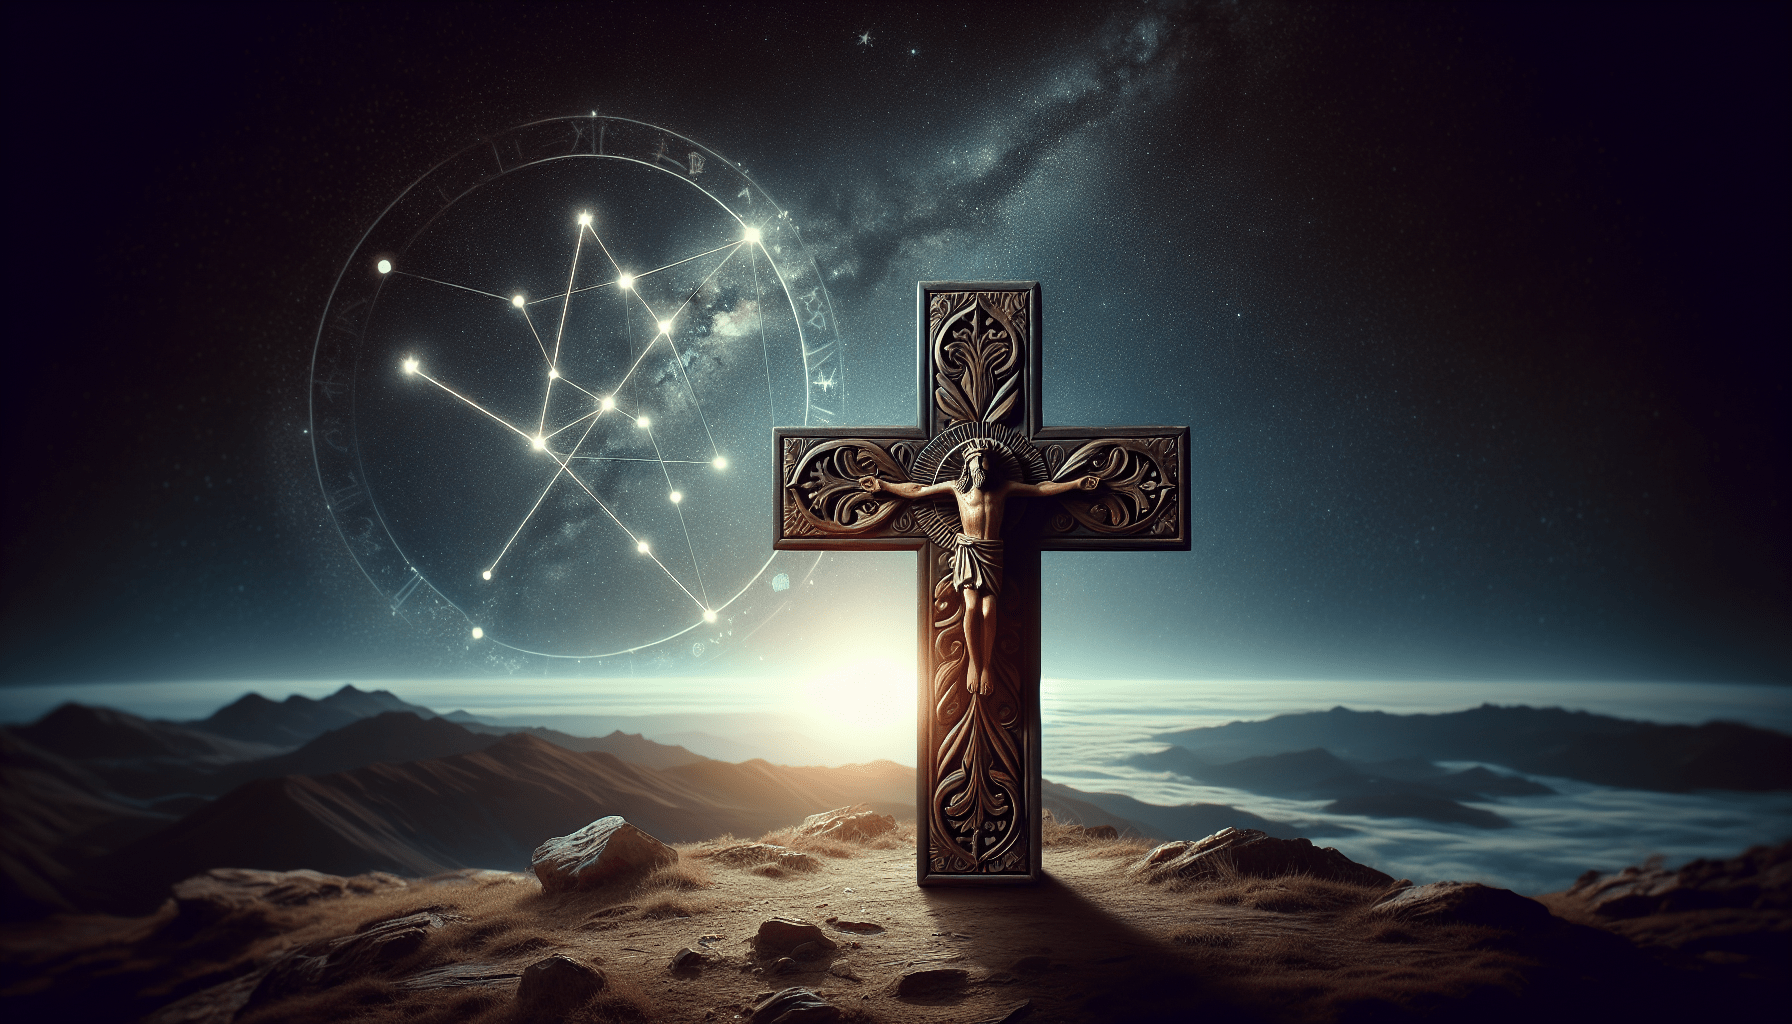 Is Astrology Allowed In Christianity?